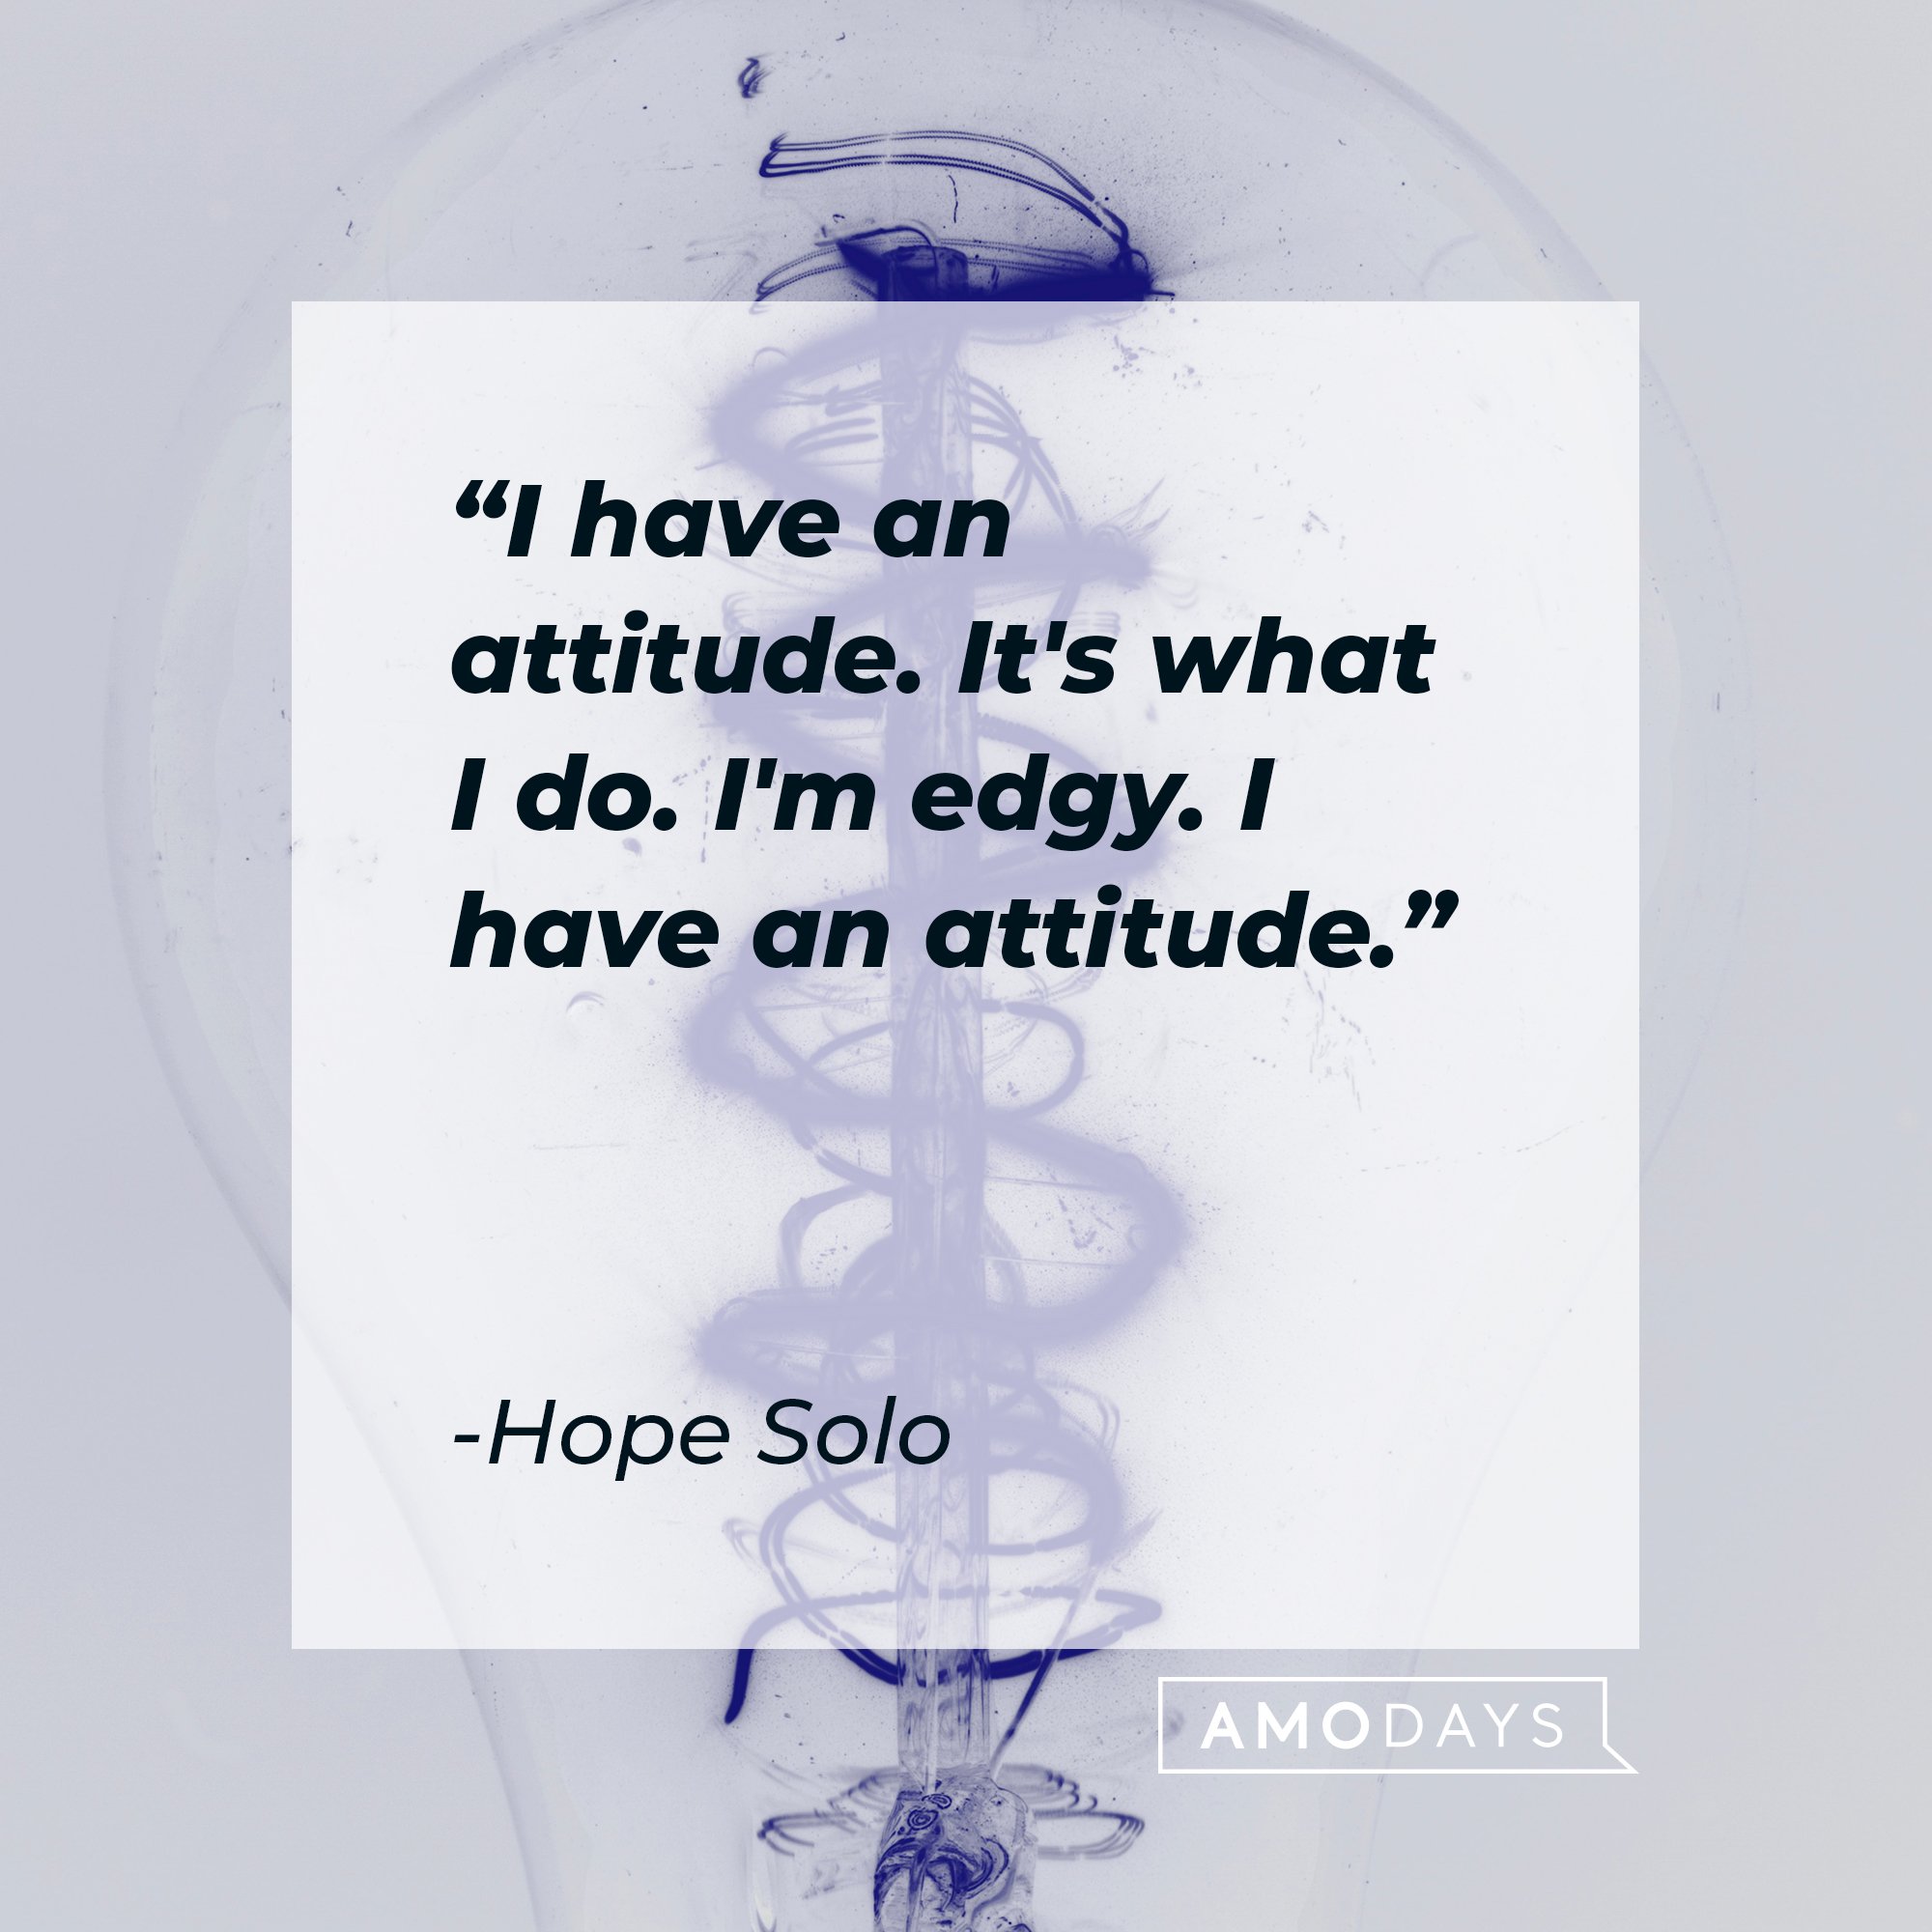 Hope Solo’s quote: "I have an attitude. It's what I do. I'm edgy. I have an attitude." | Image: AmoDays